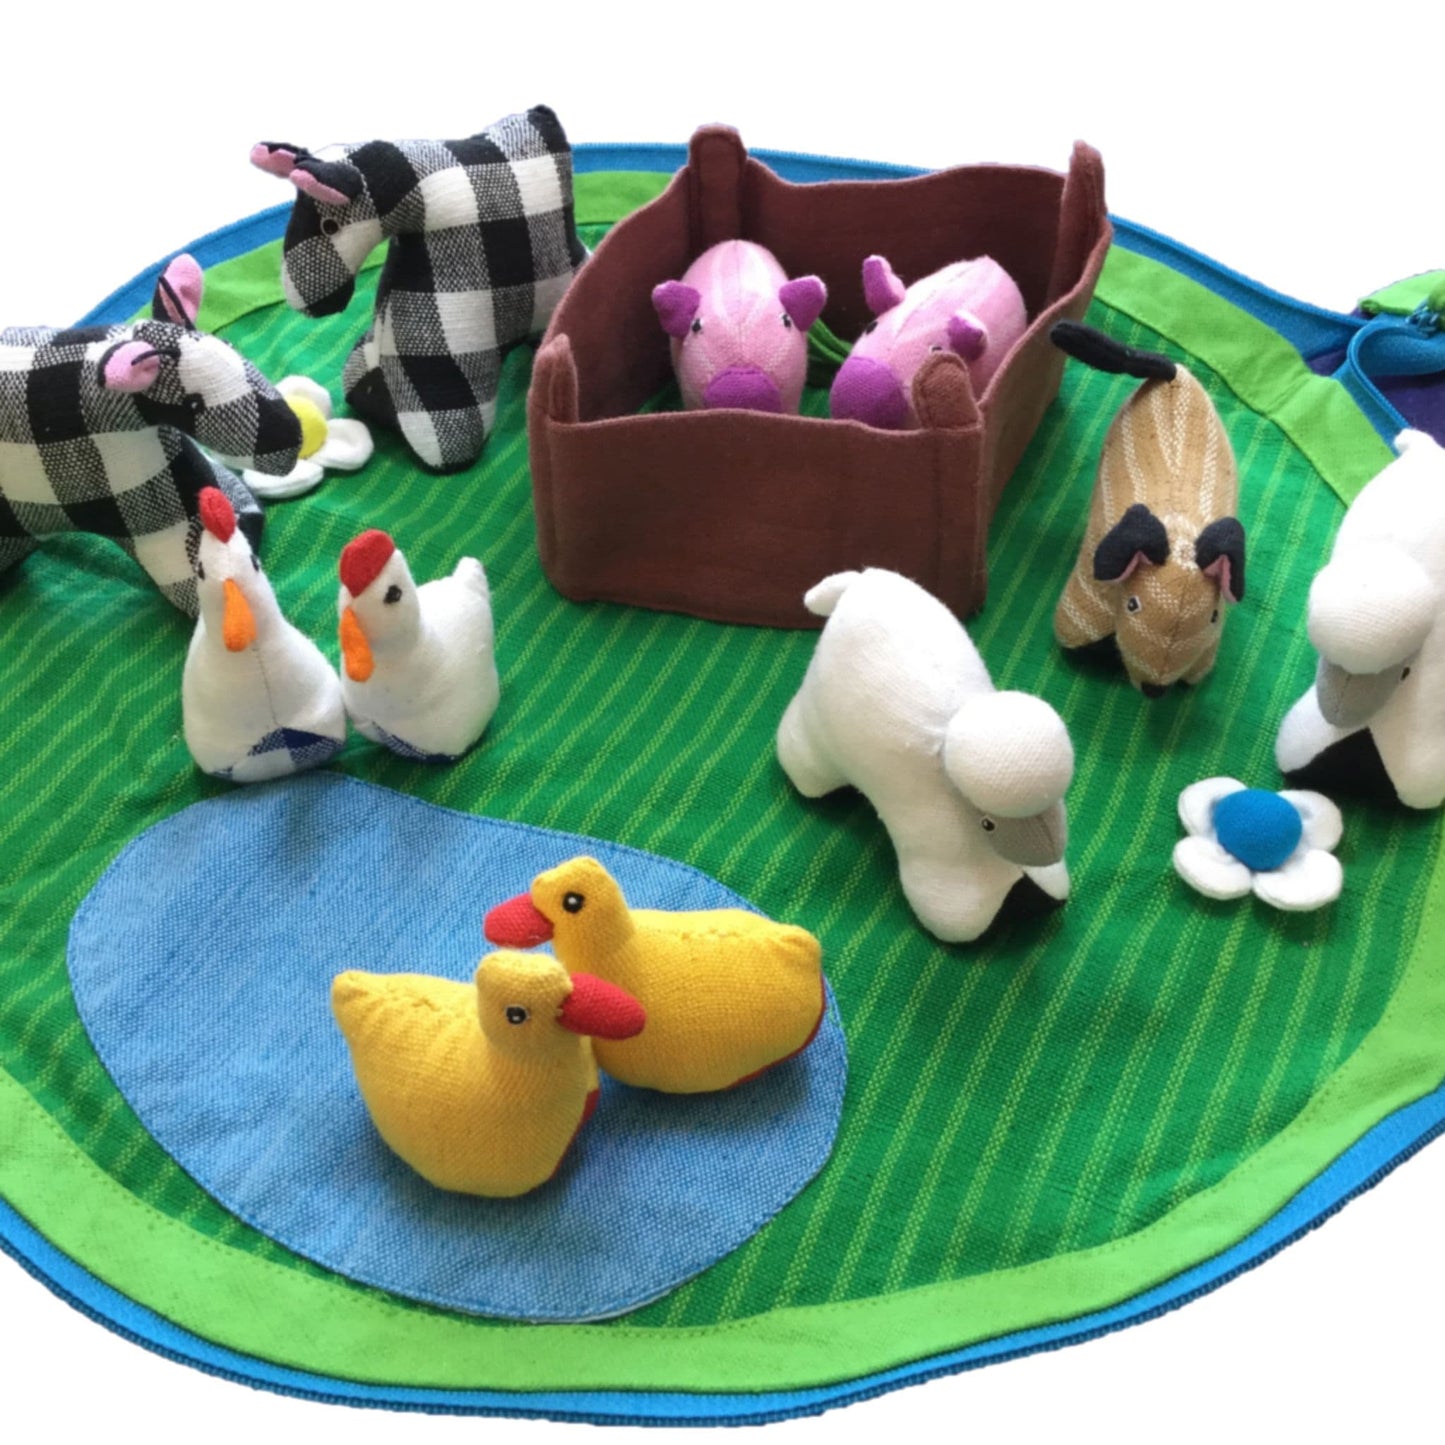 Farm Play Set Toy Pouch in Fair Trade Cotton - toy animals